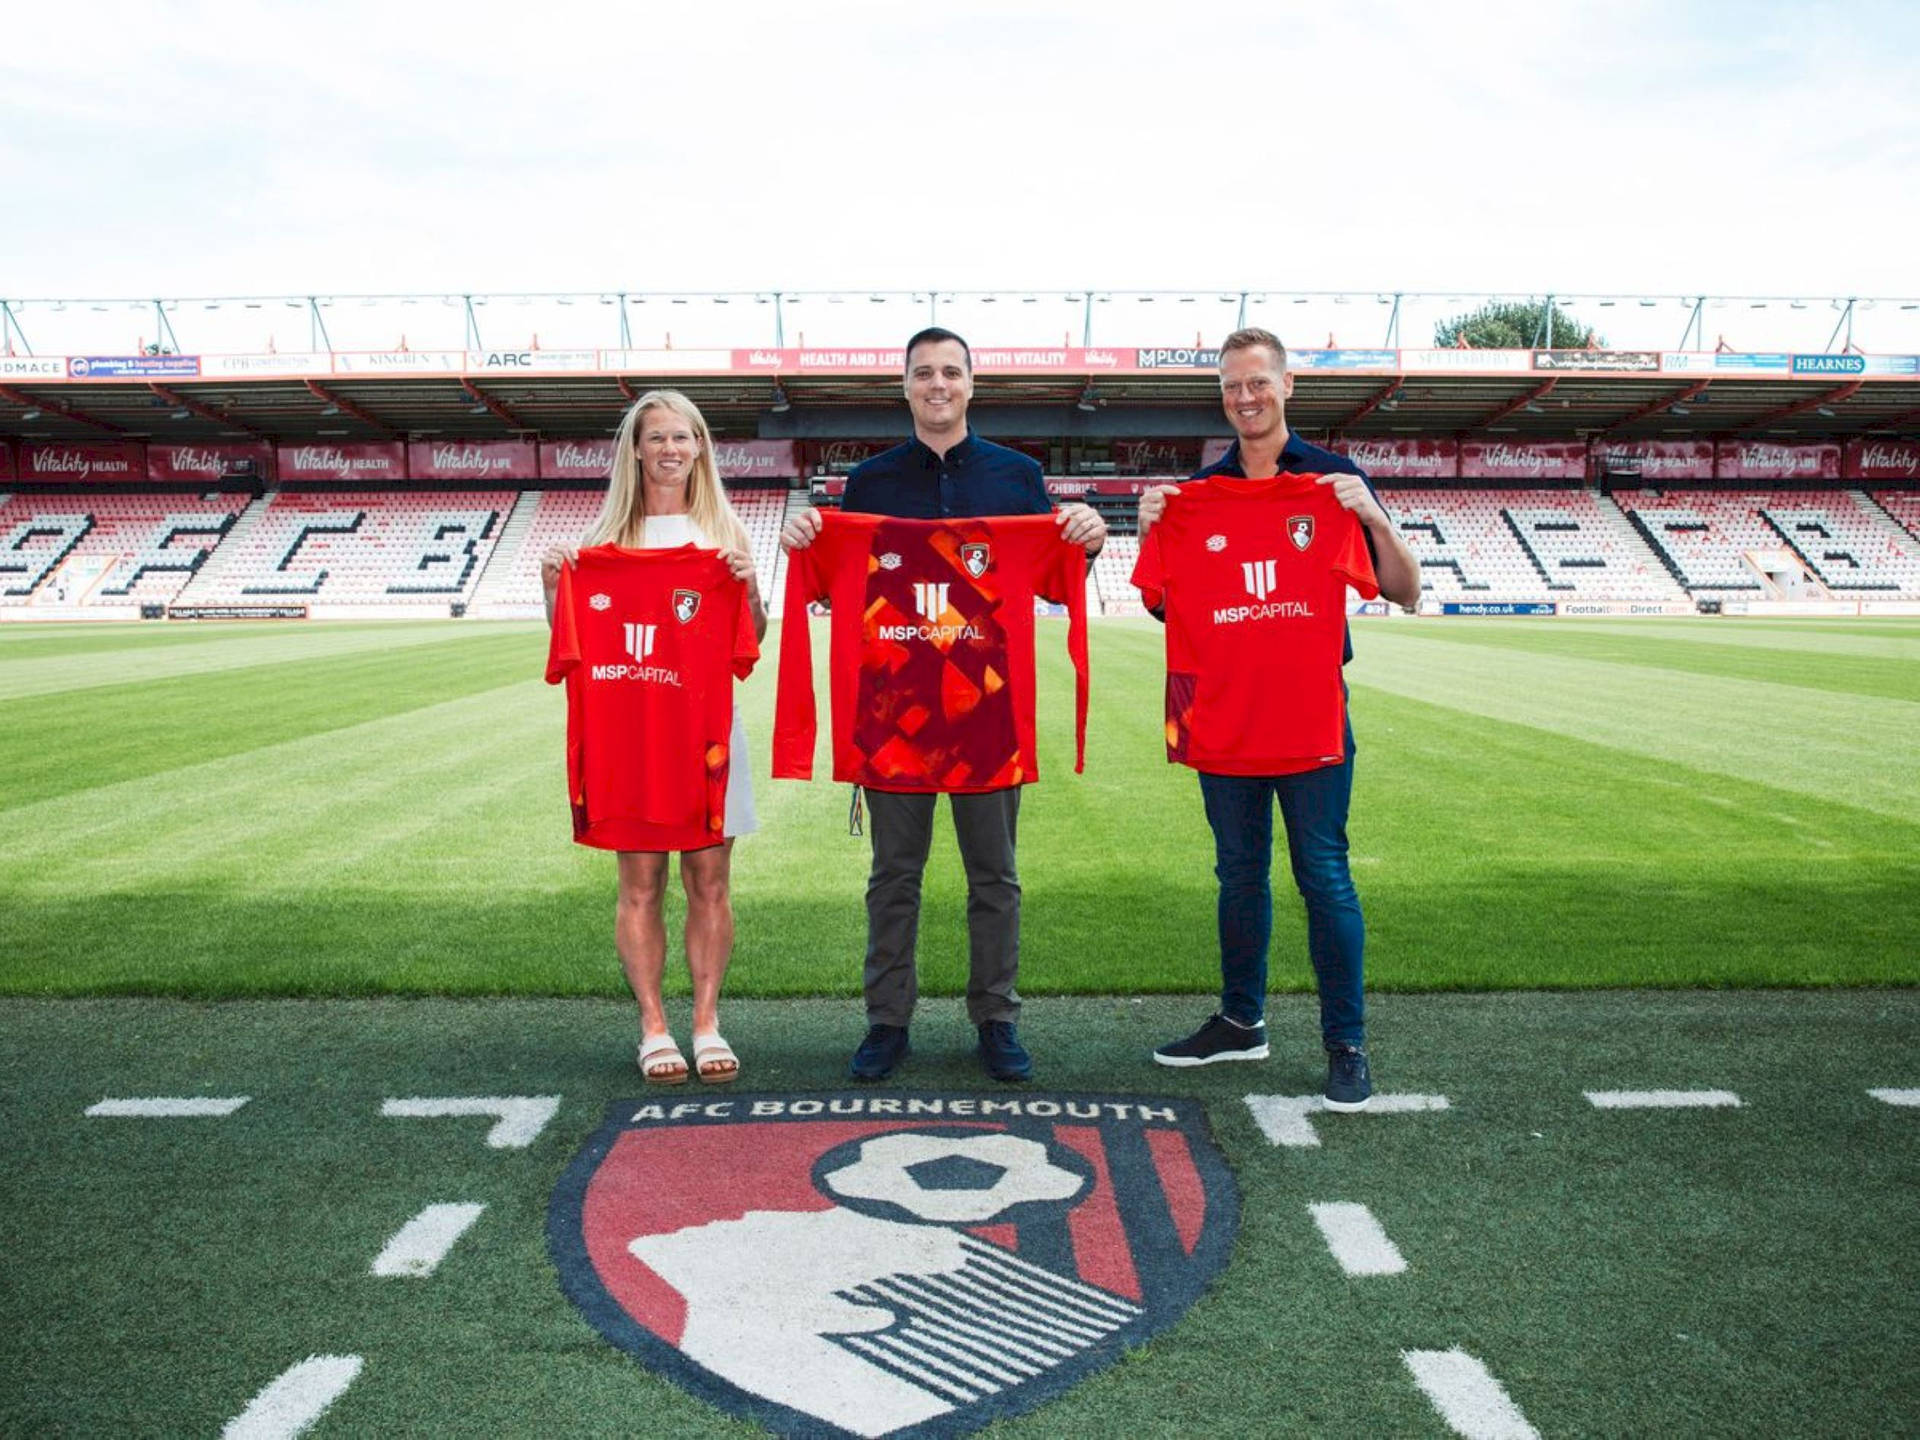 People Holding Afc Bournemouth Jerseys Picture